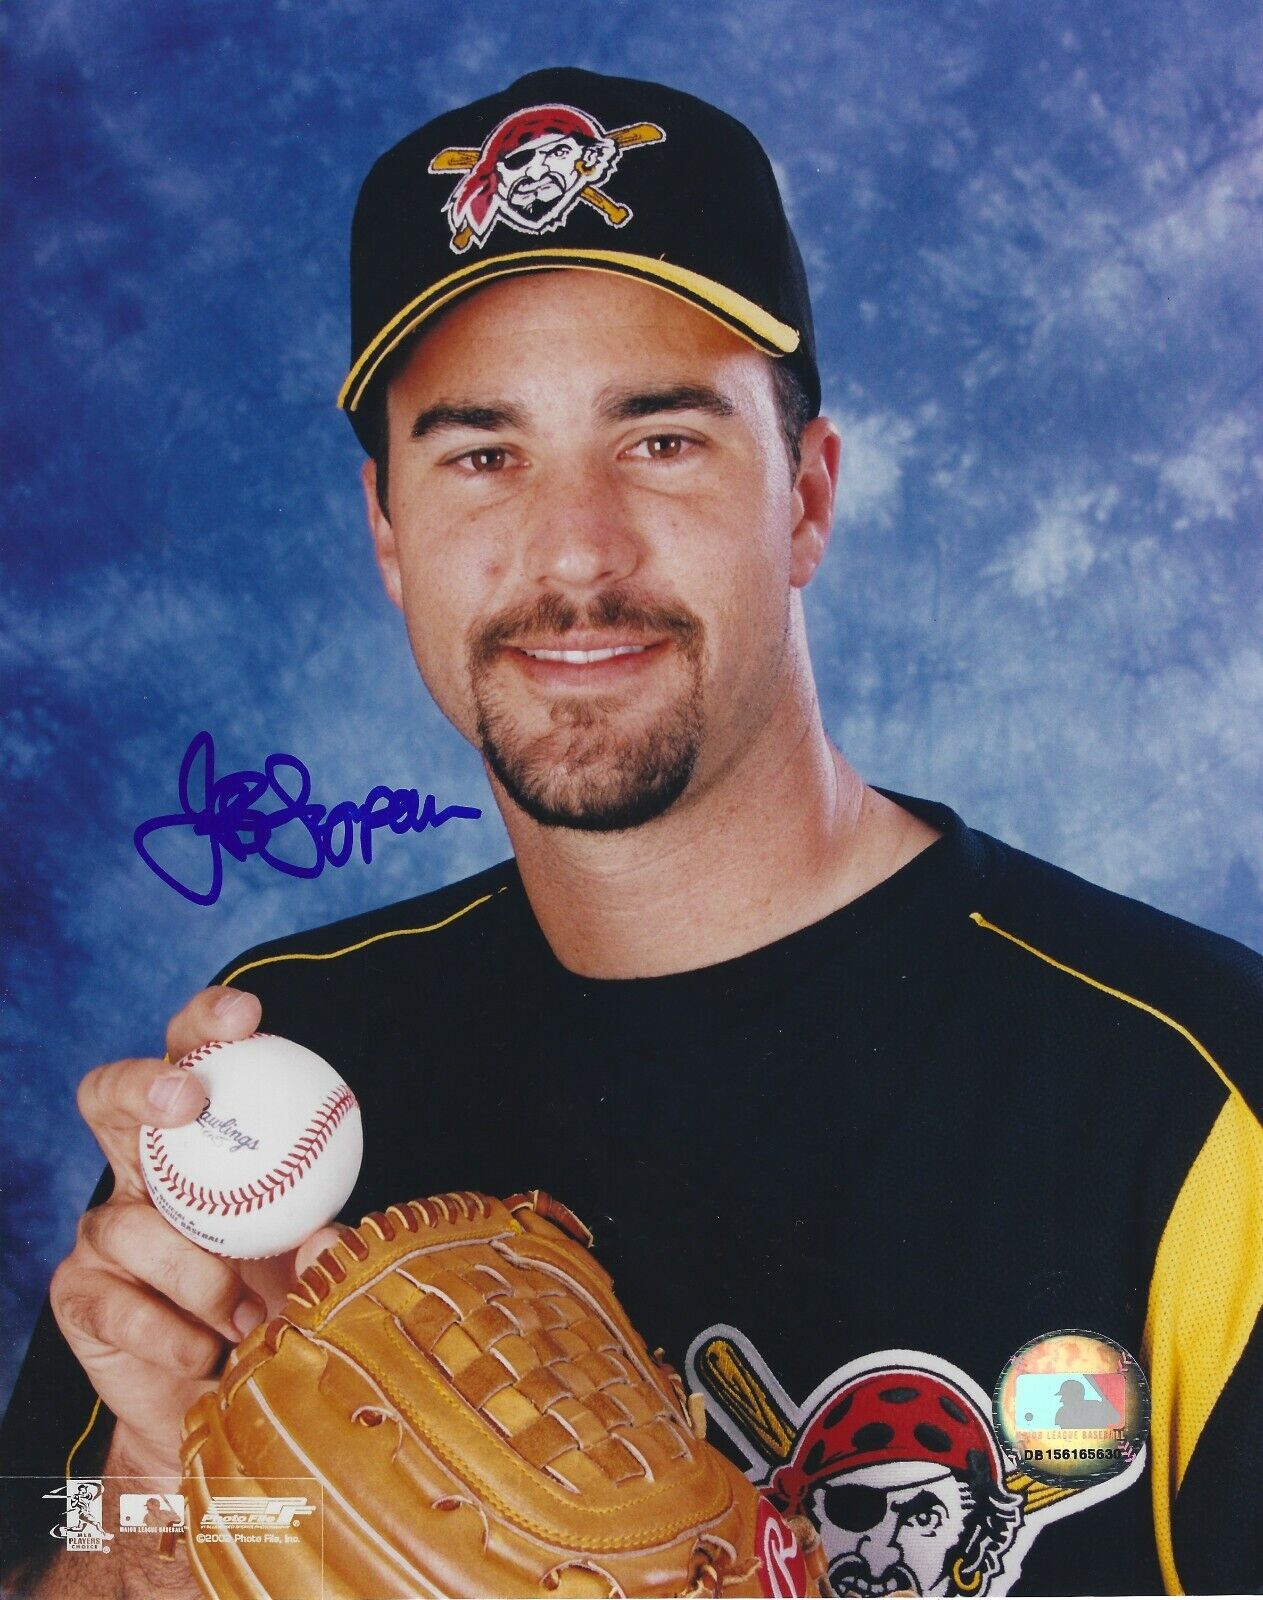 Autographed 8x10 JEFF SUPPAN Pittsburgh Pirates Photo Poster painting w/COA